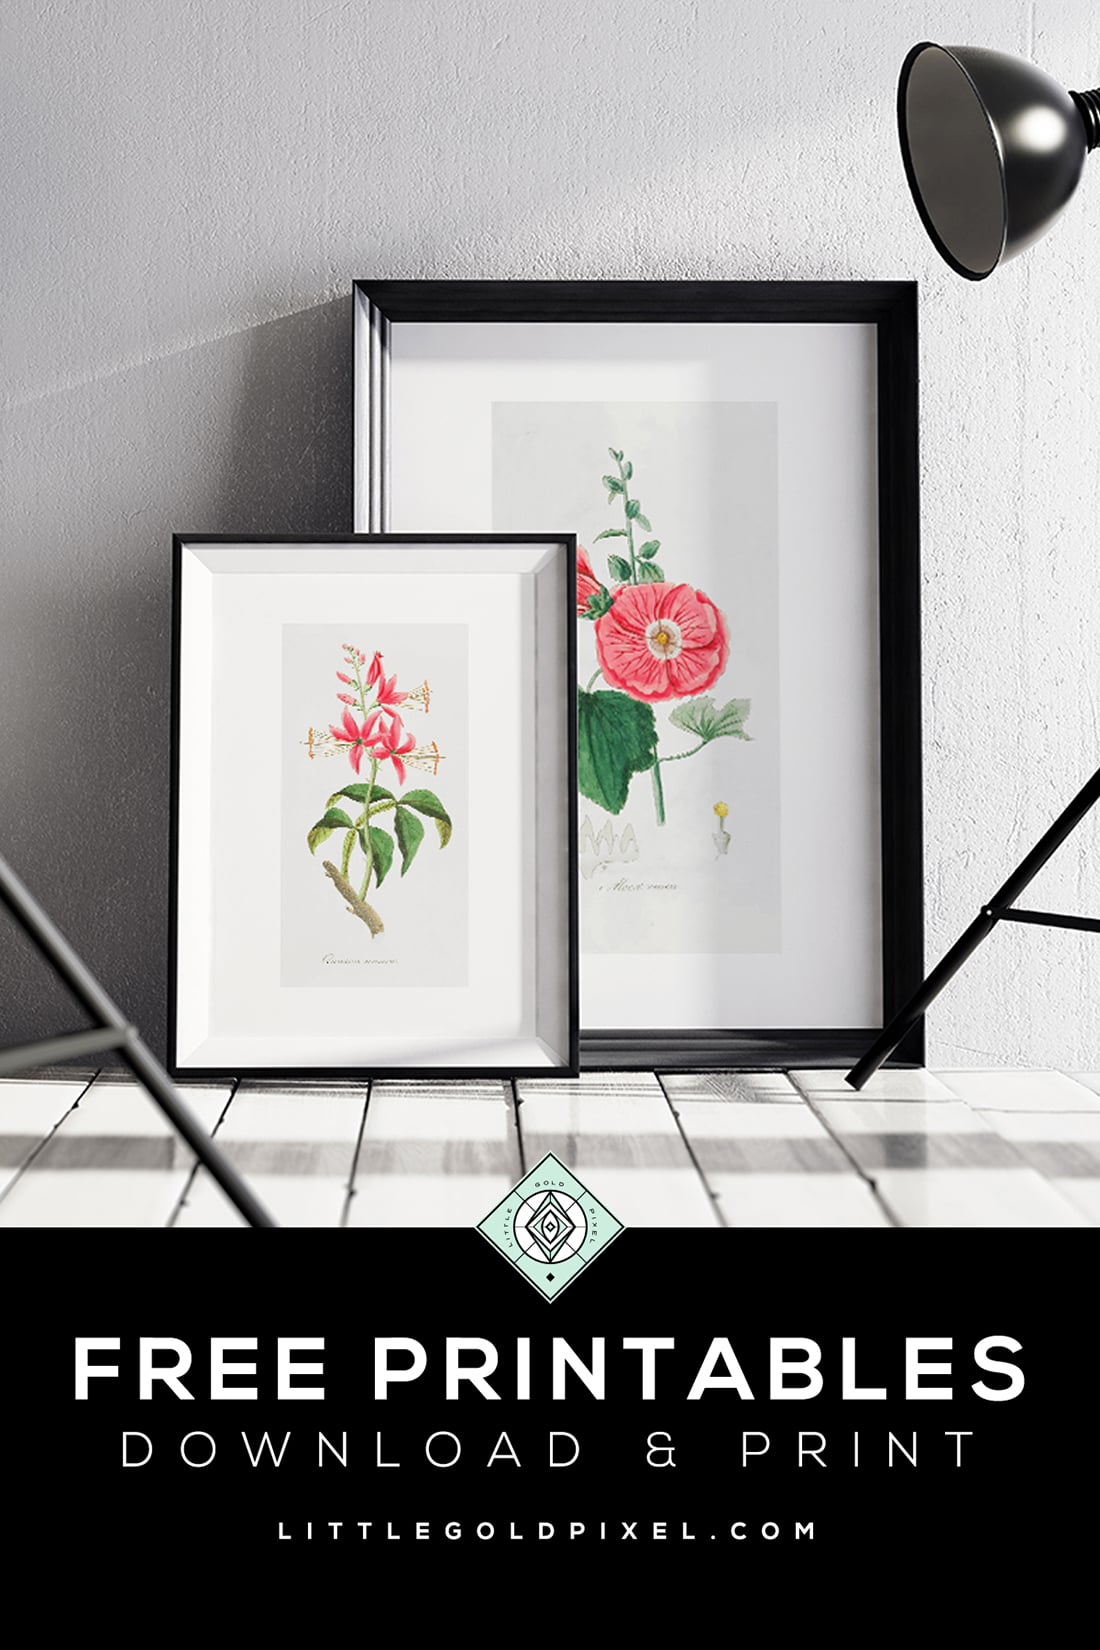 Free Vintage Art • In which I break down my favorite sites for finding free vintage art. Bonus: I retouch and resize two vintage botanical printables for you to download and display at home. • Little Gold Pixel